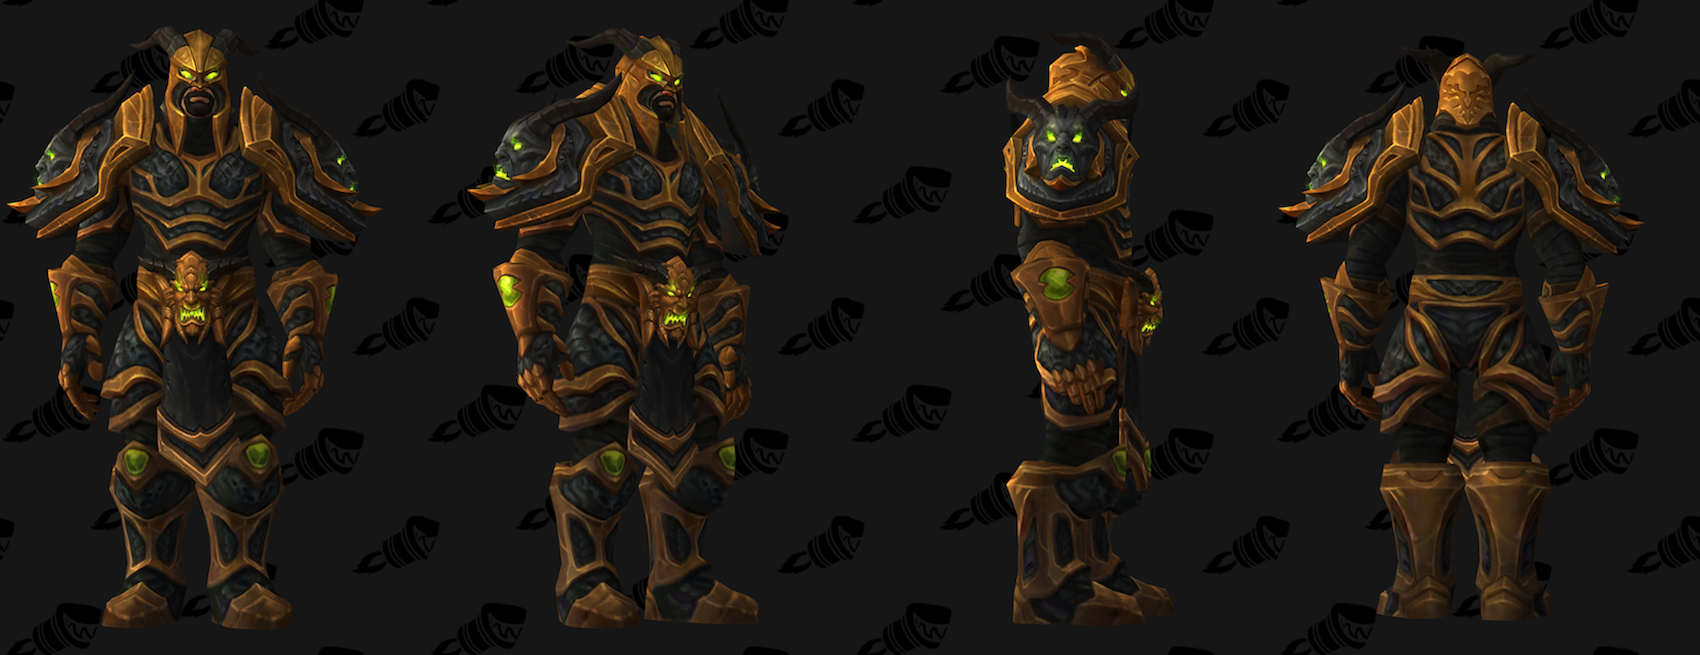 Demon Hunter Tank Azerite Traits/Powers and Armor in Battle for Azeroth